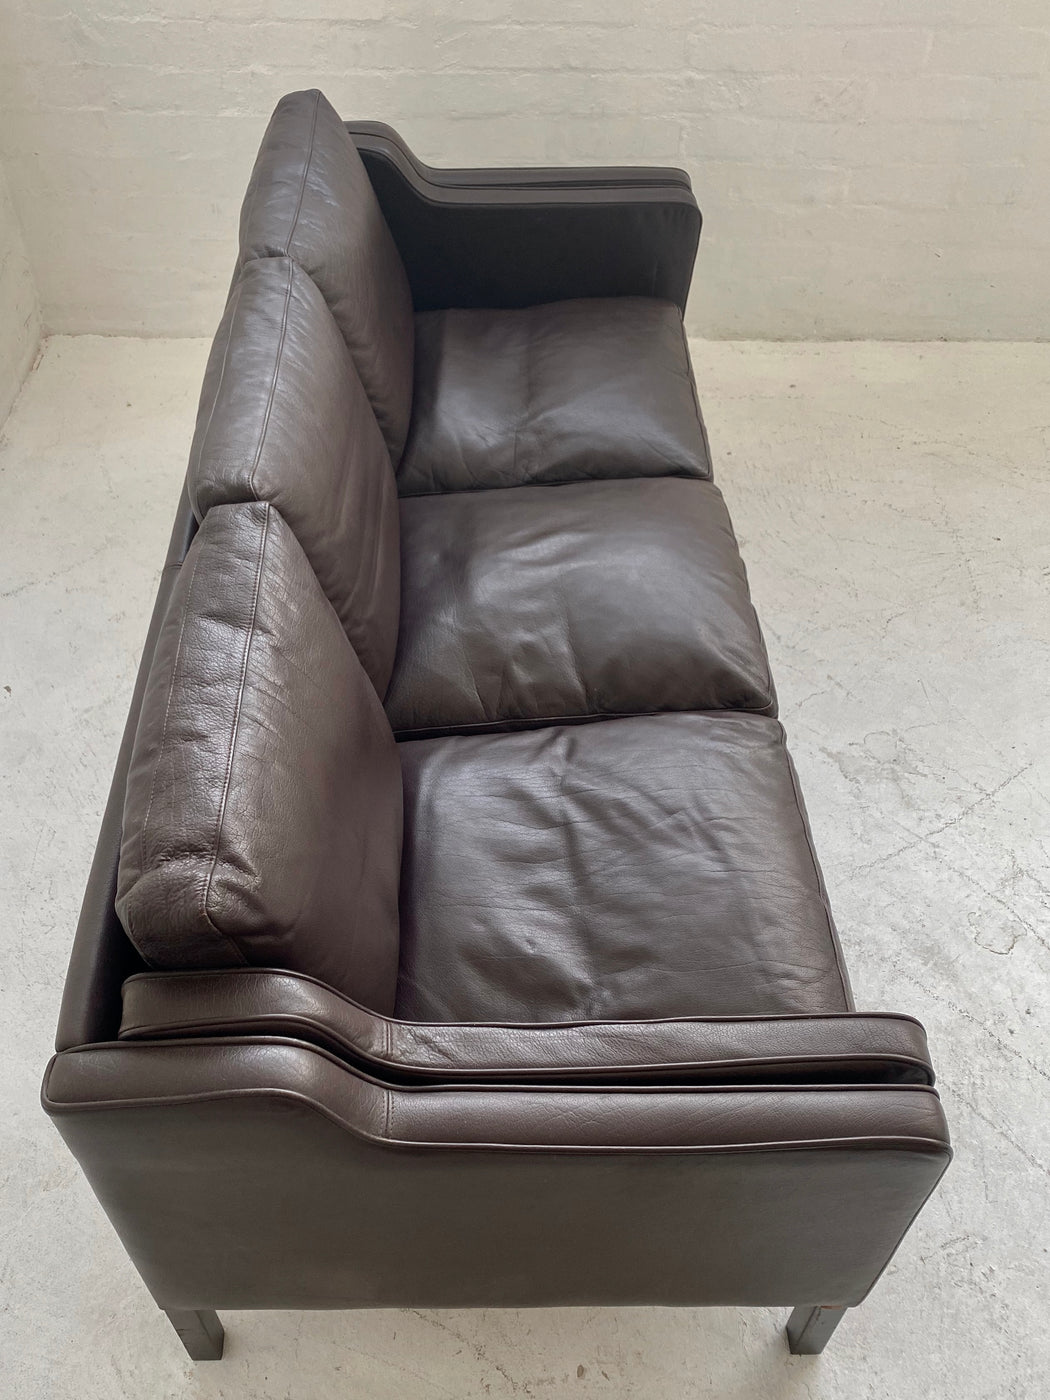 Stouby Leather Sofa